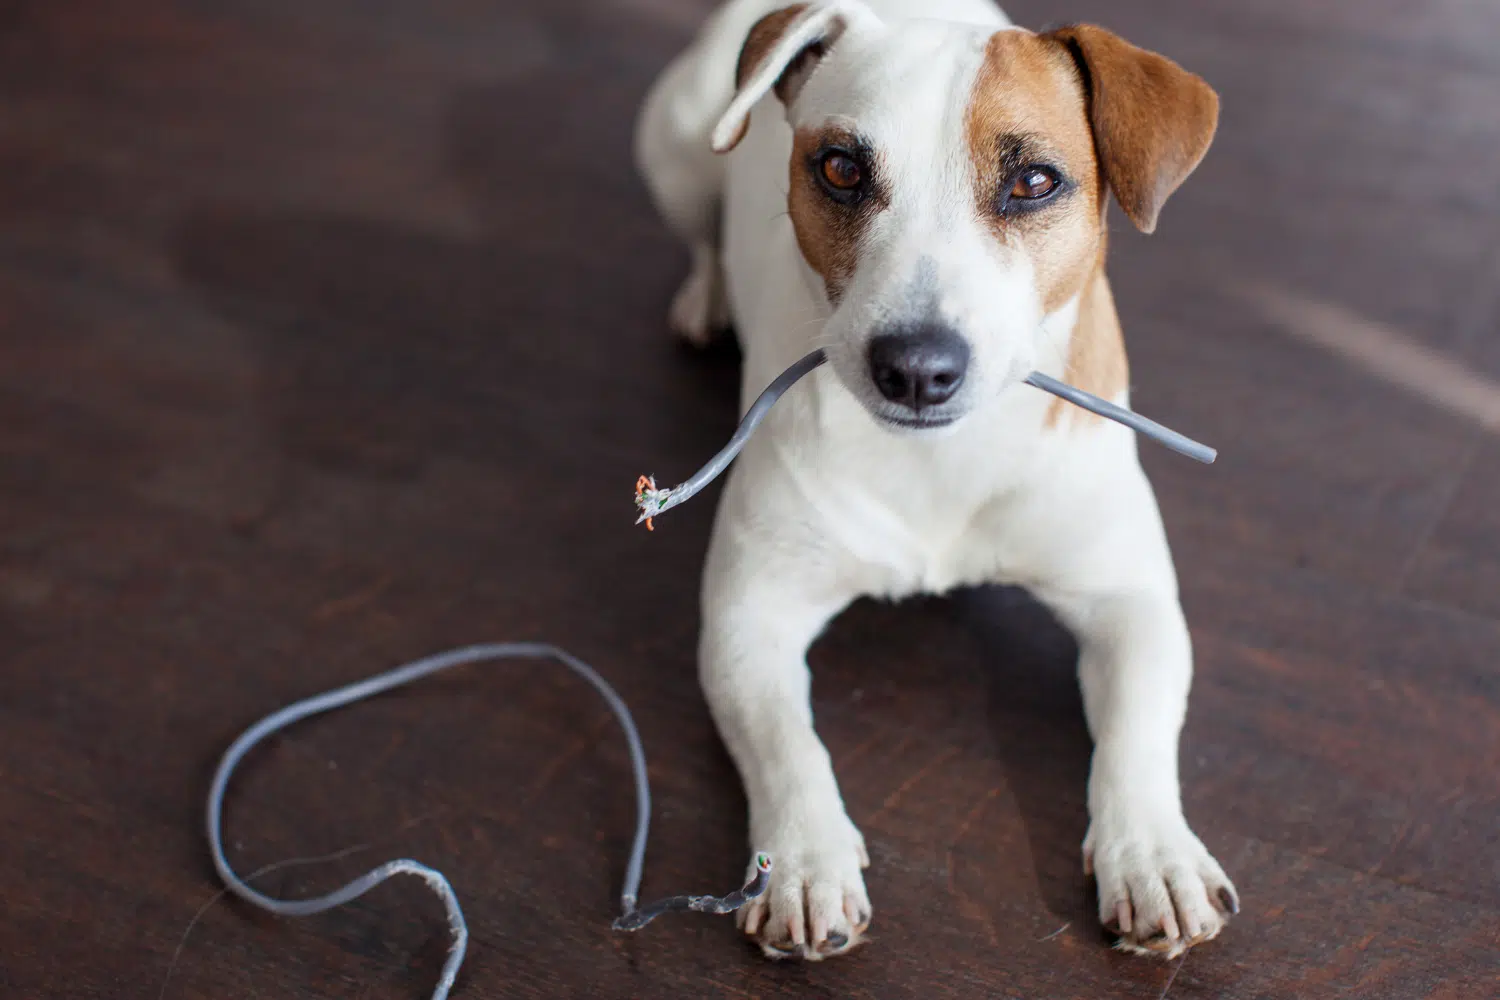 Puppy chewing cable